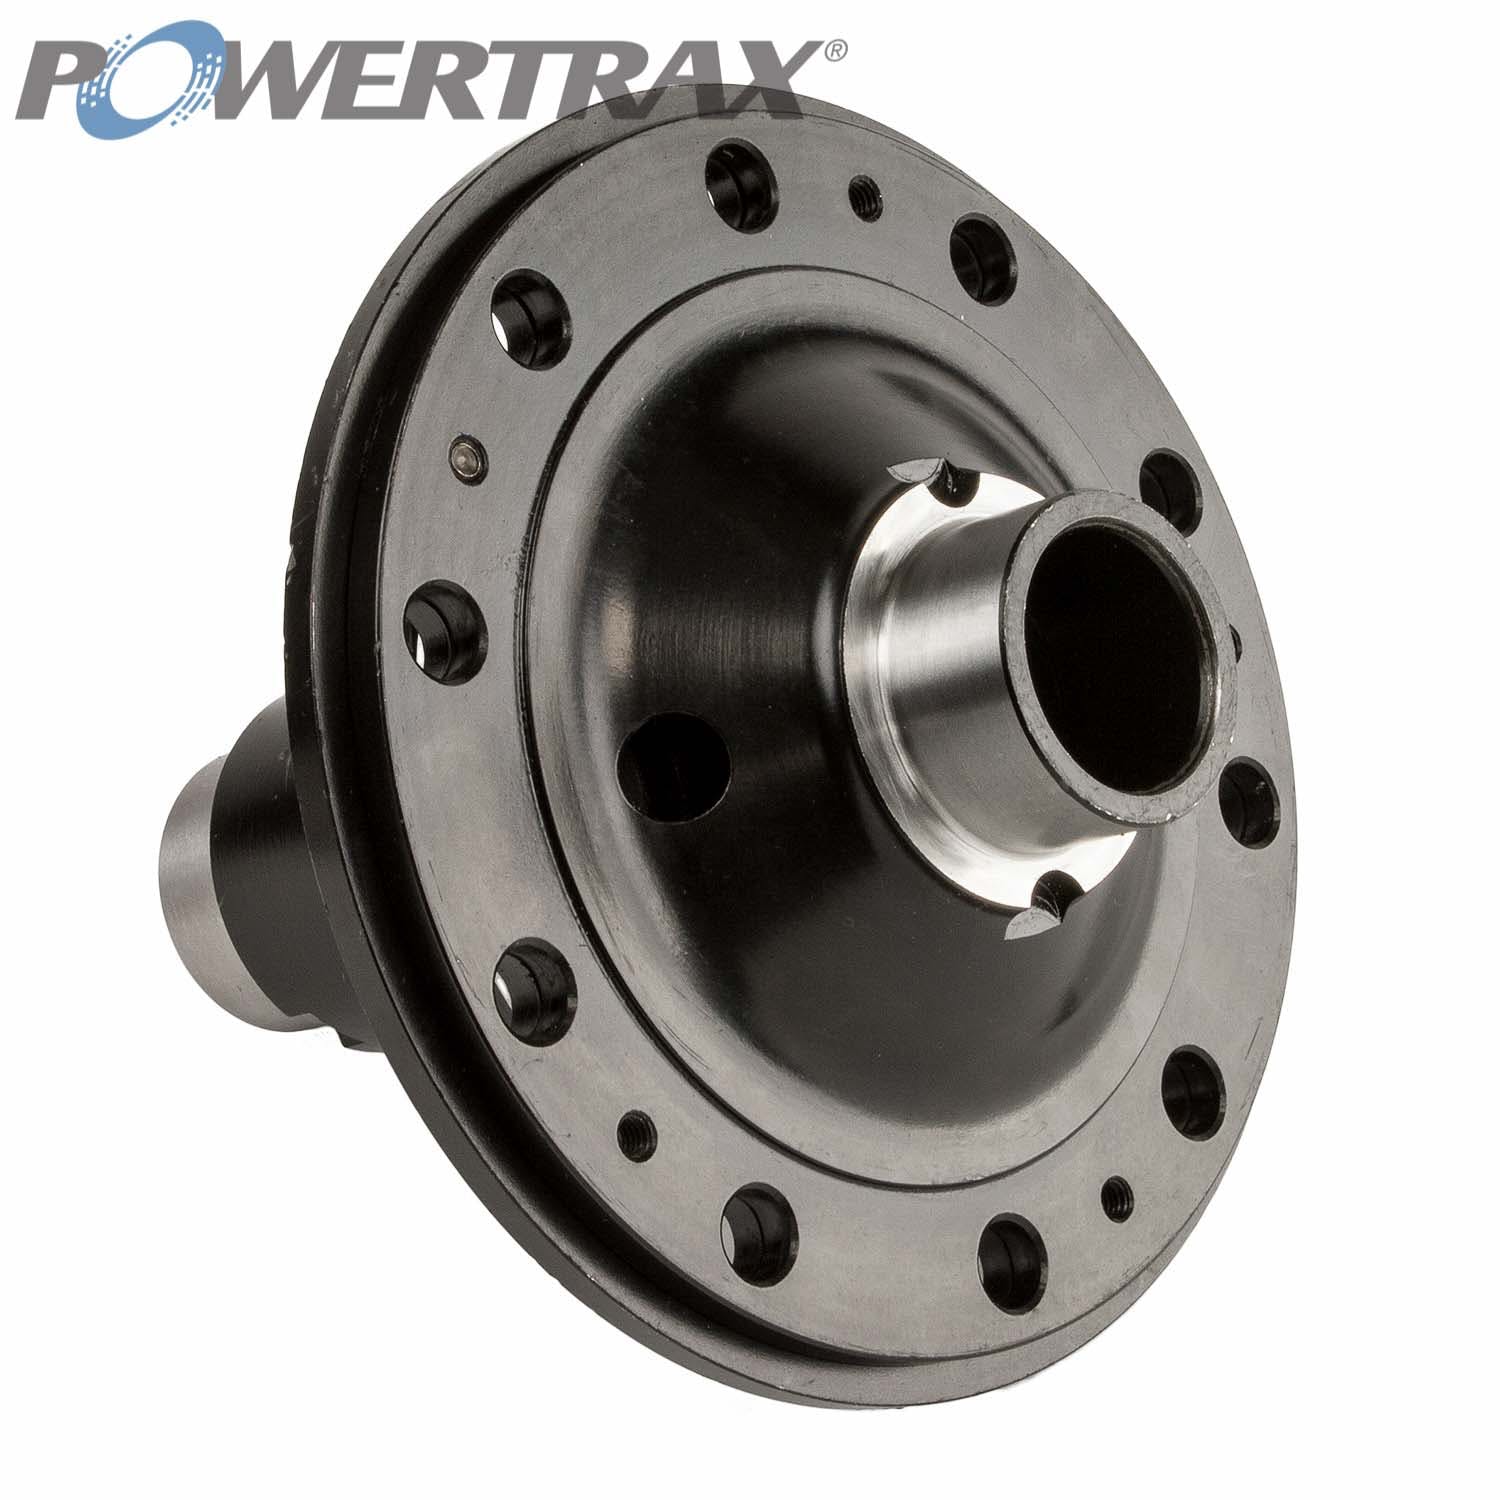 PowerTrax LK436035 Differential Lock Assembly